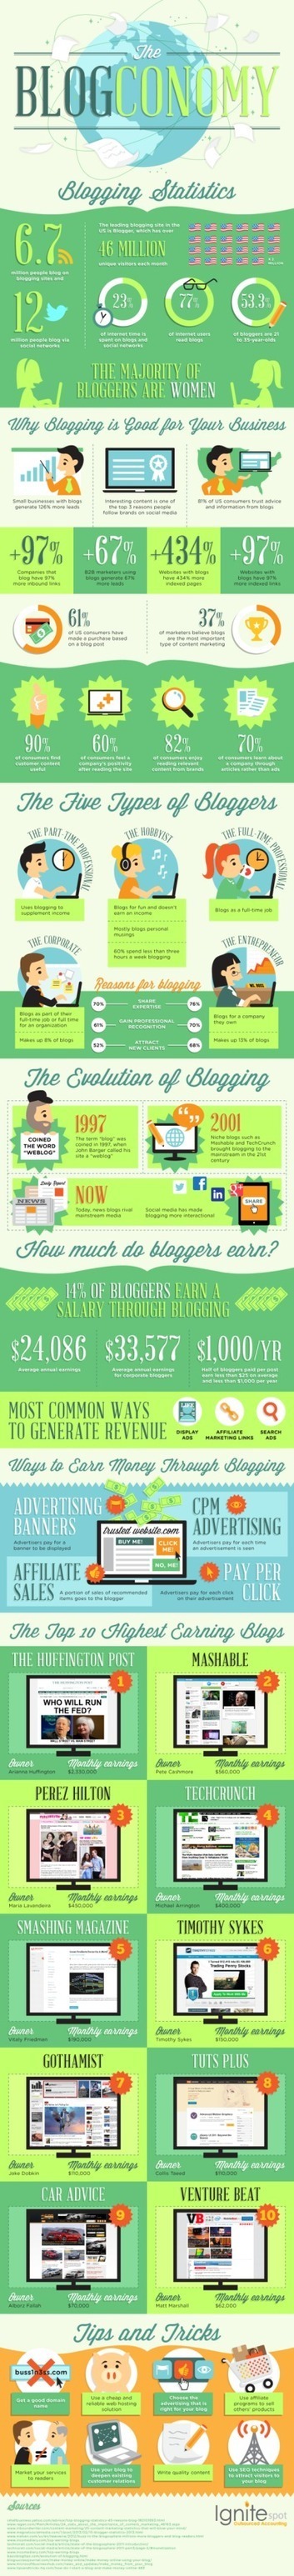 Why Every Business Needs a Blog [Infographic] | Social Marketing Revolution | Scoop.it